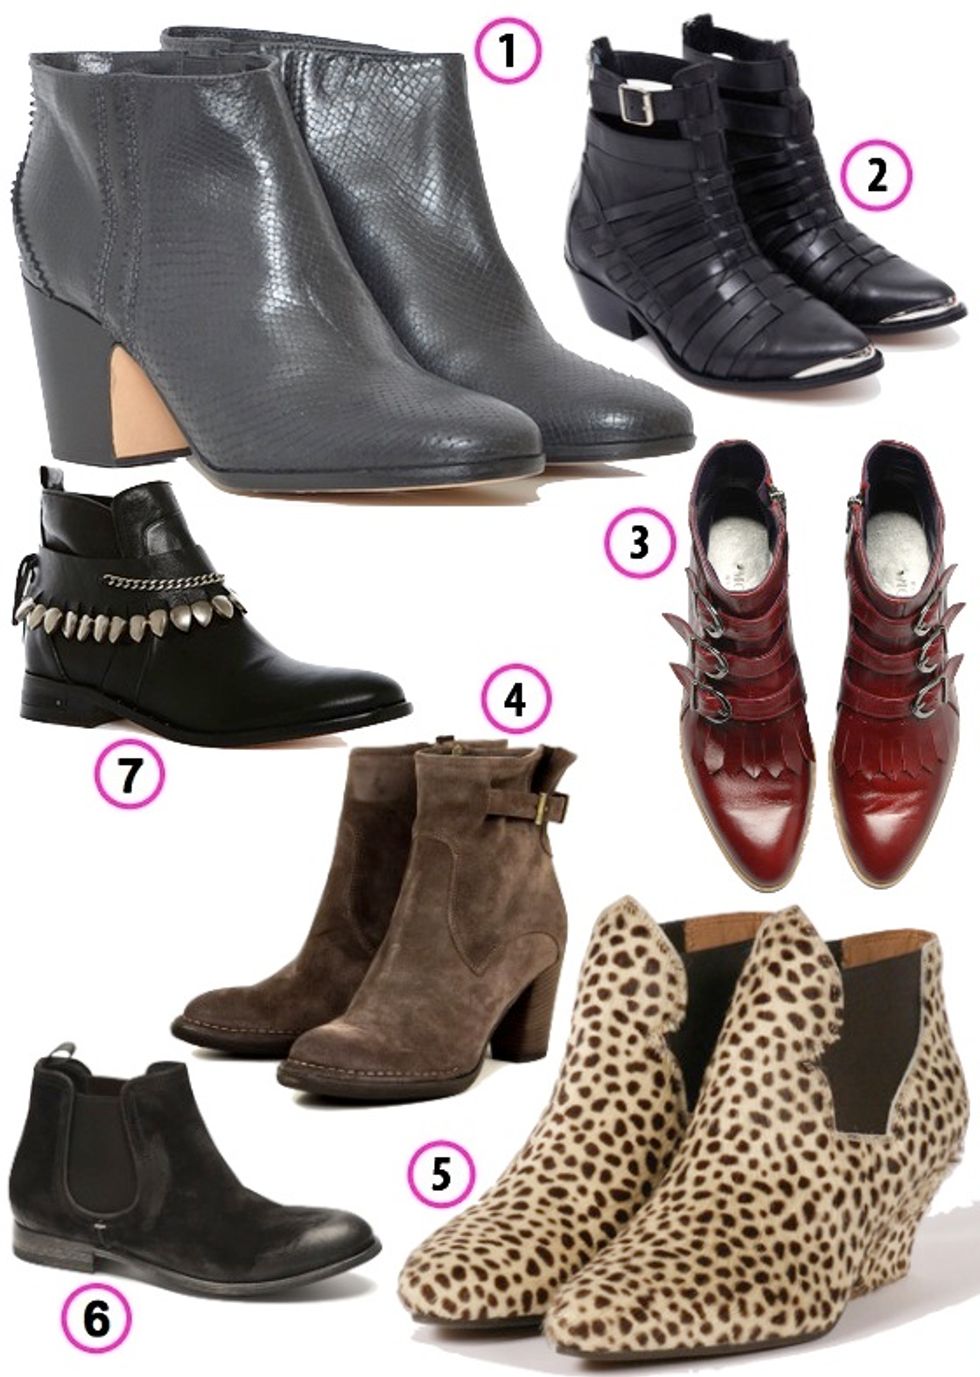 Look of the Week: Our Favorite Ankle Boots from Local Boutiques